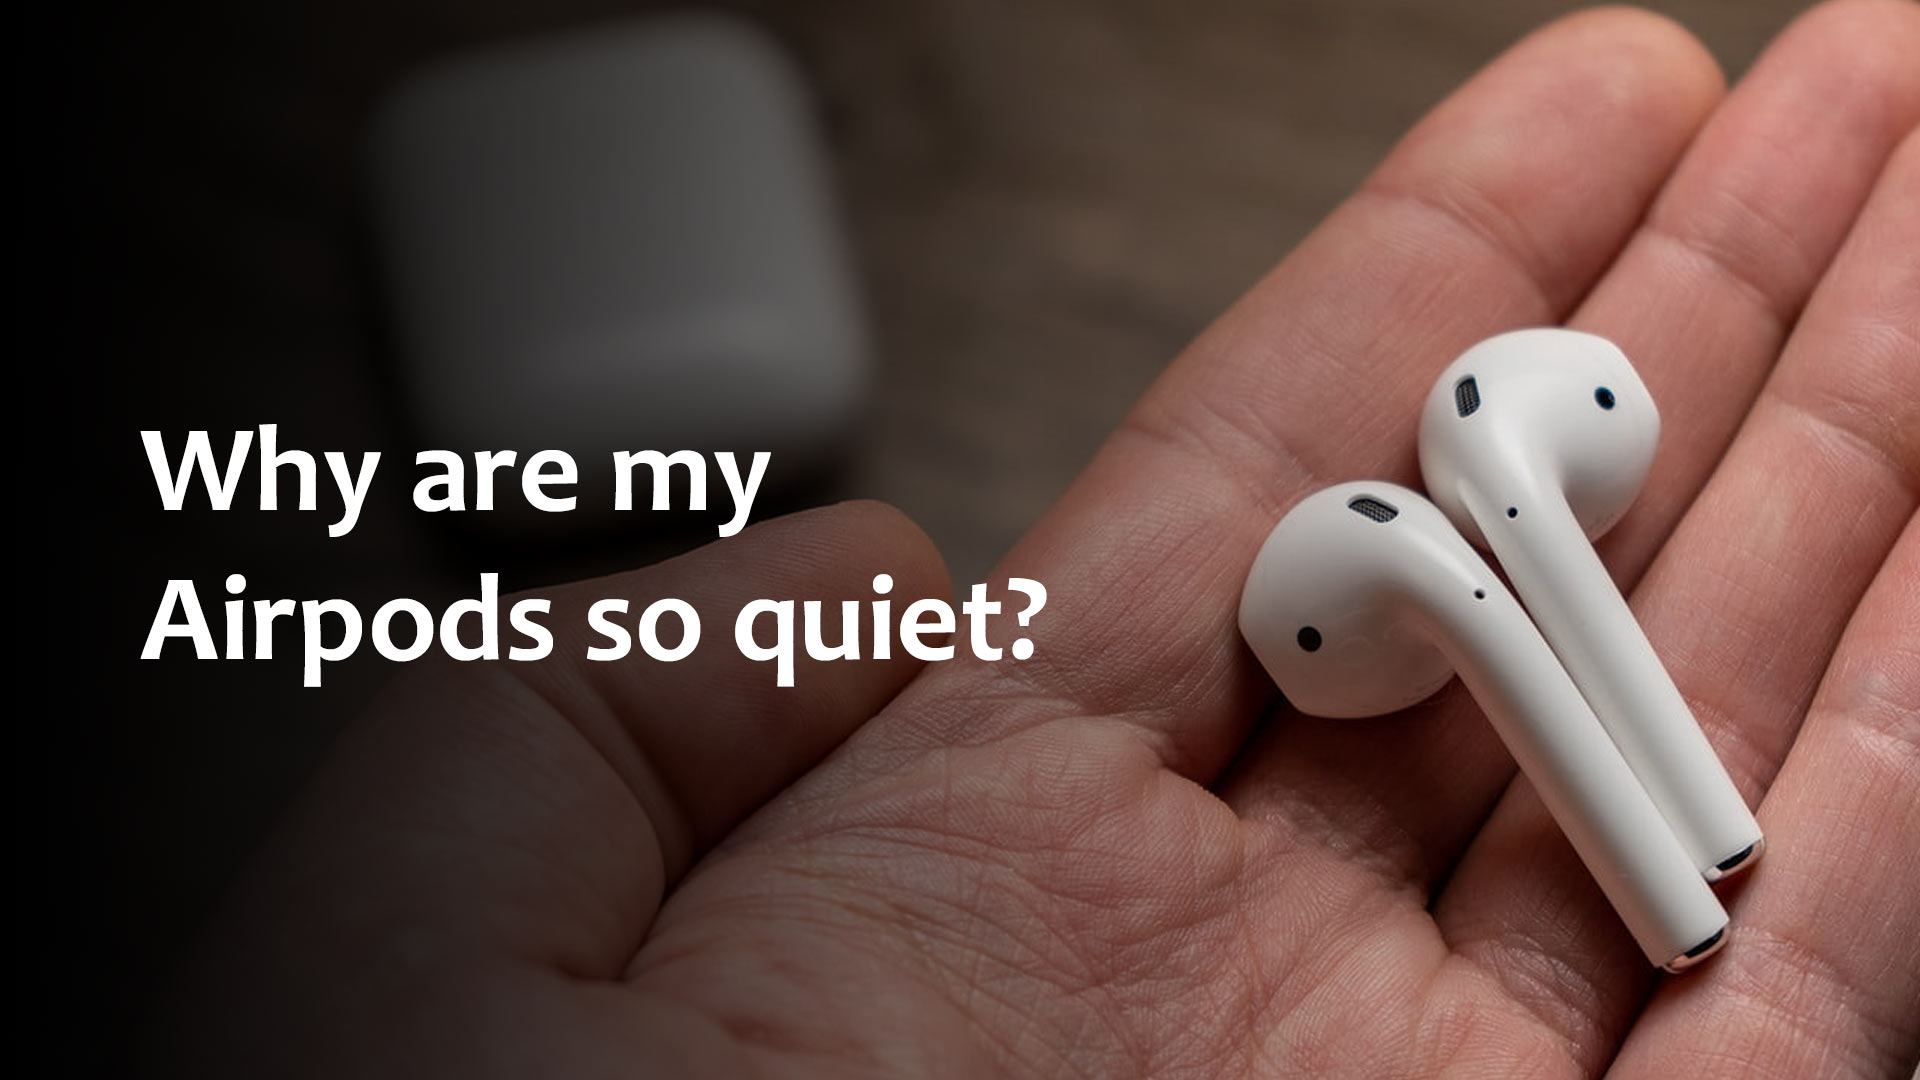 Why are my AirPods so quiet?